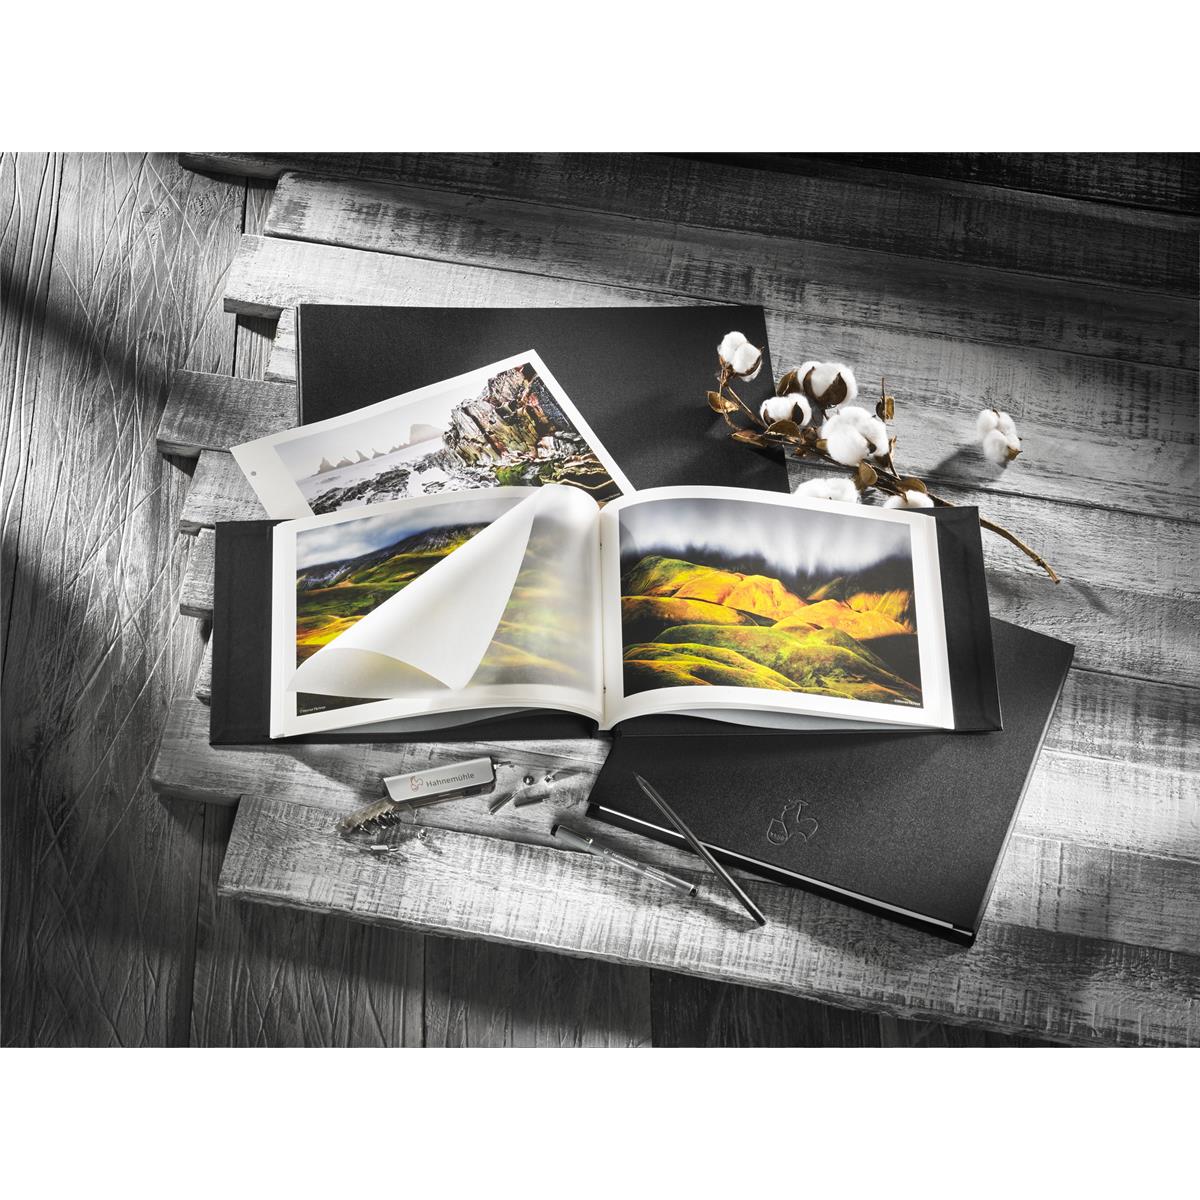 Image of Hahnemuhle Linen Album Cover Set